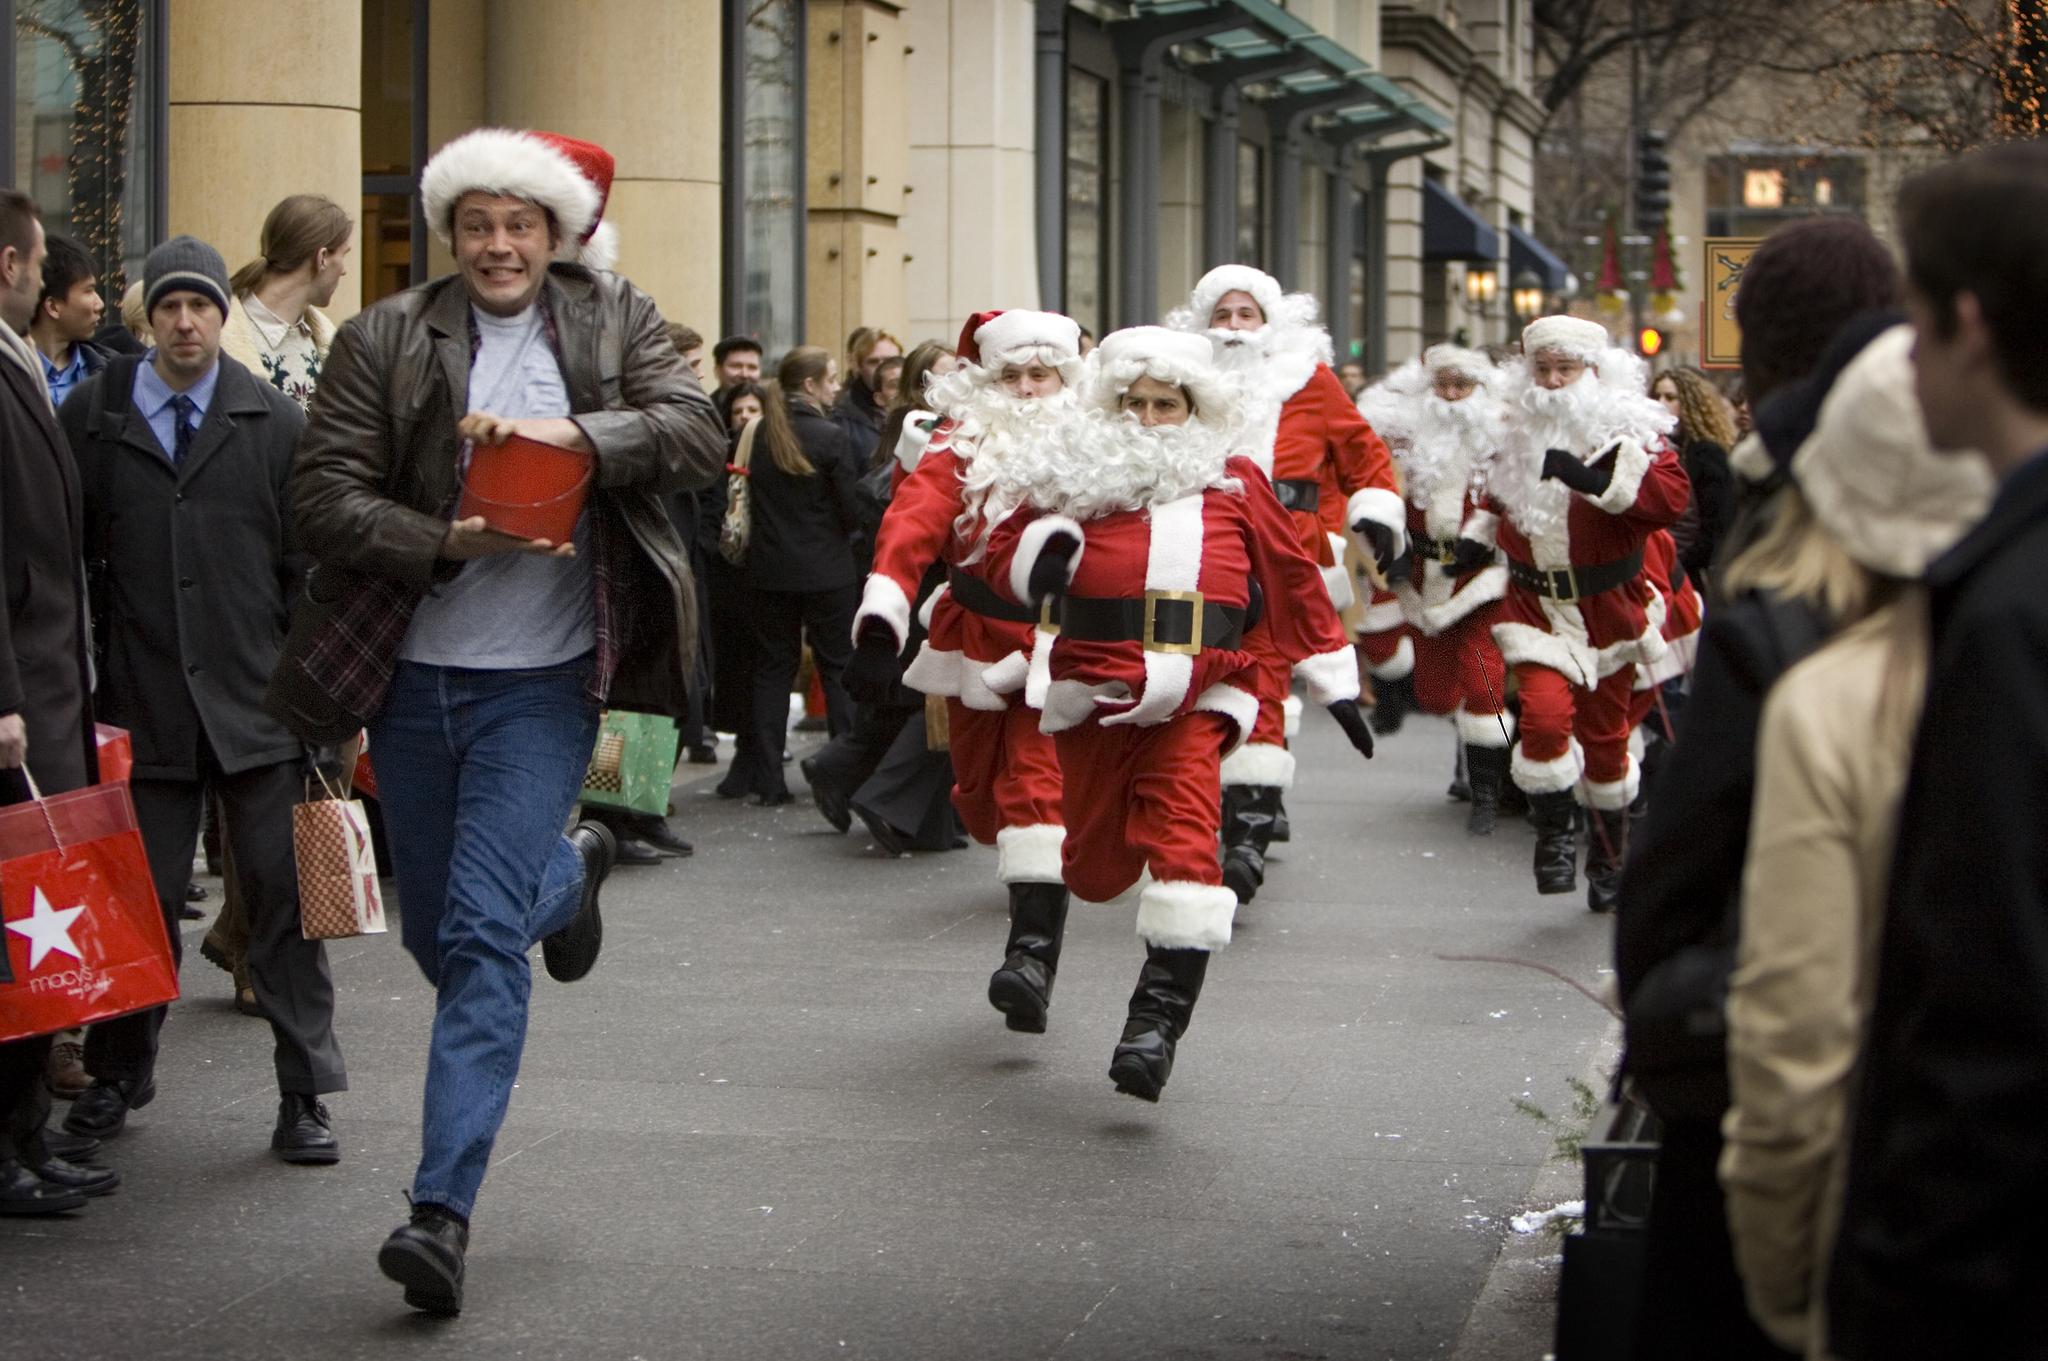 Fred Claus (PG) - The Movie Buff